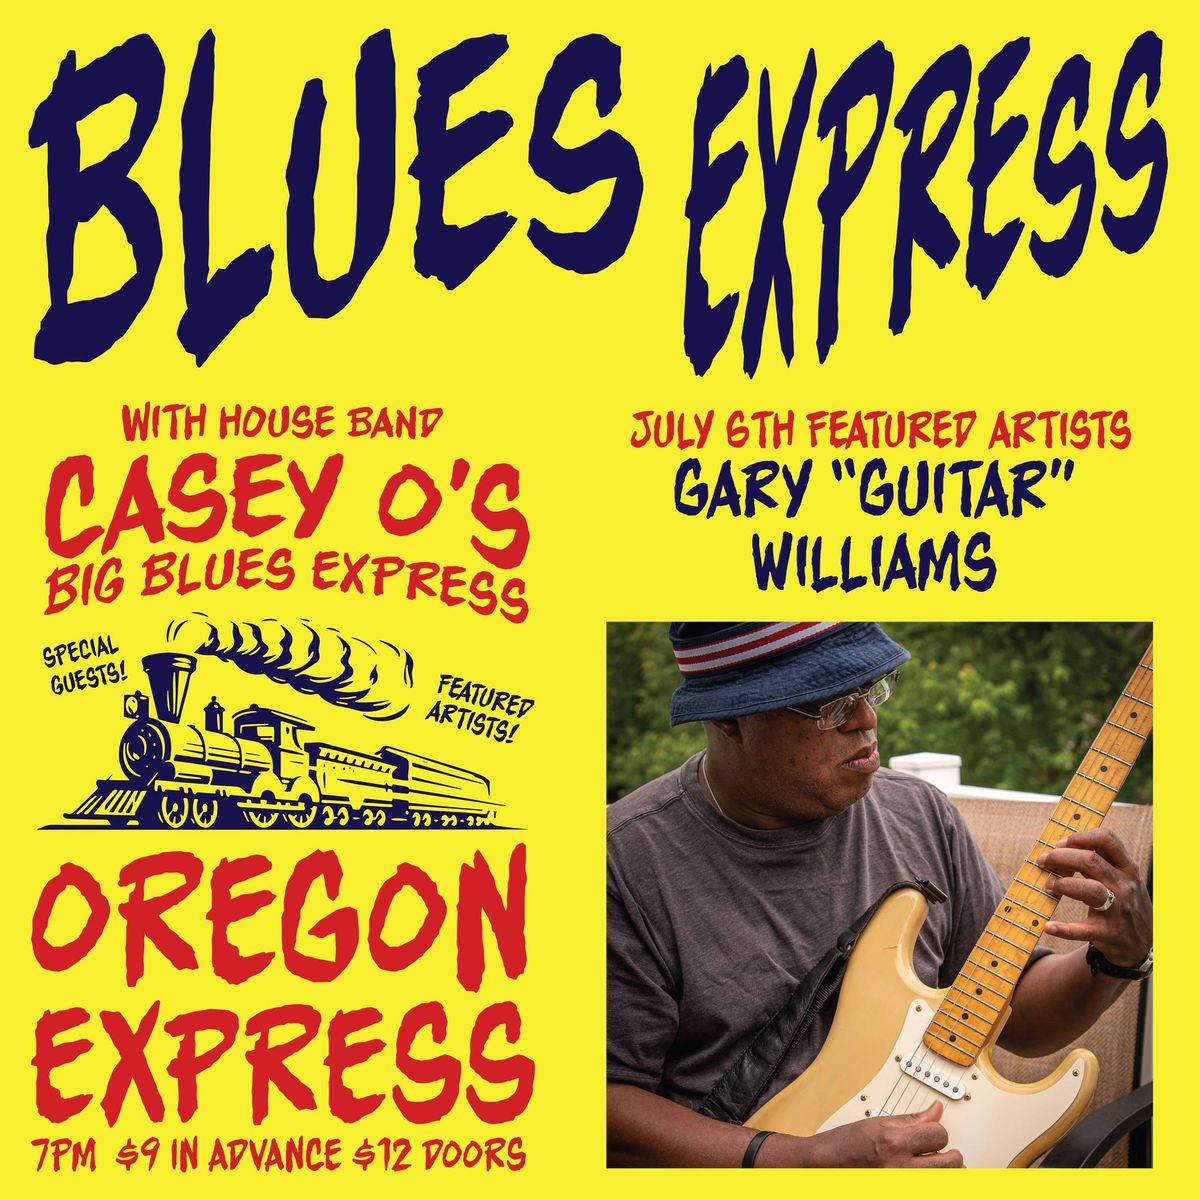 Blues Express featuring Gary Guitar Williams - July 6th